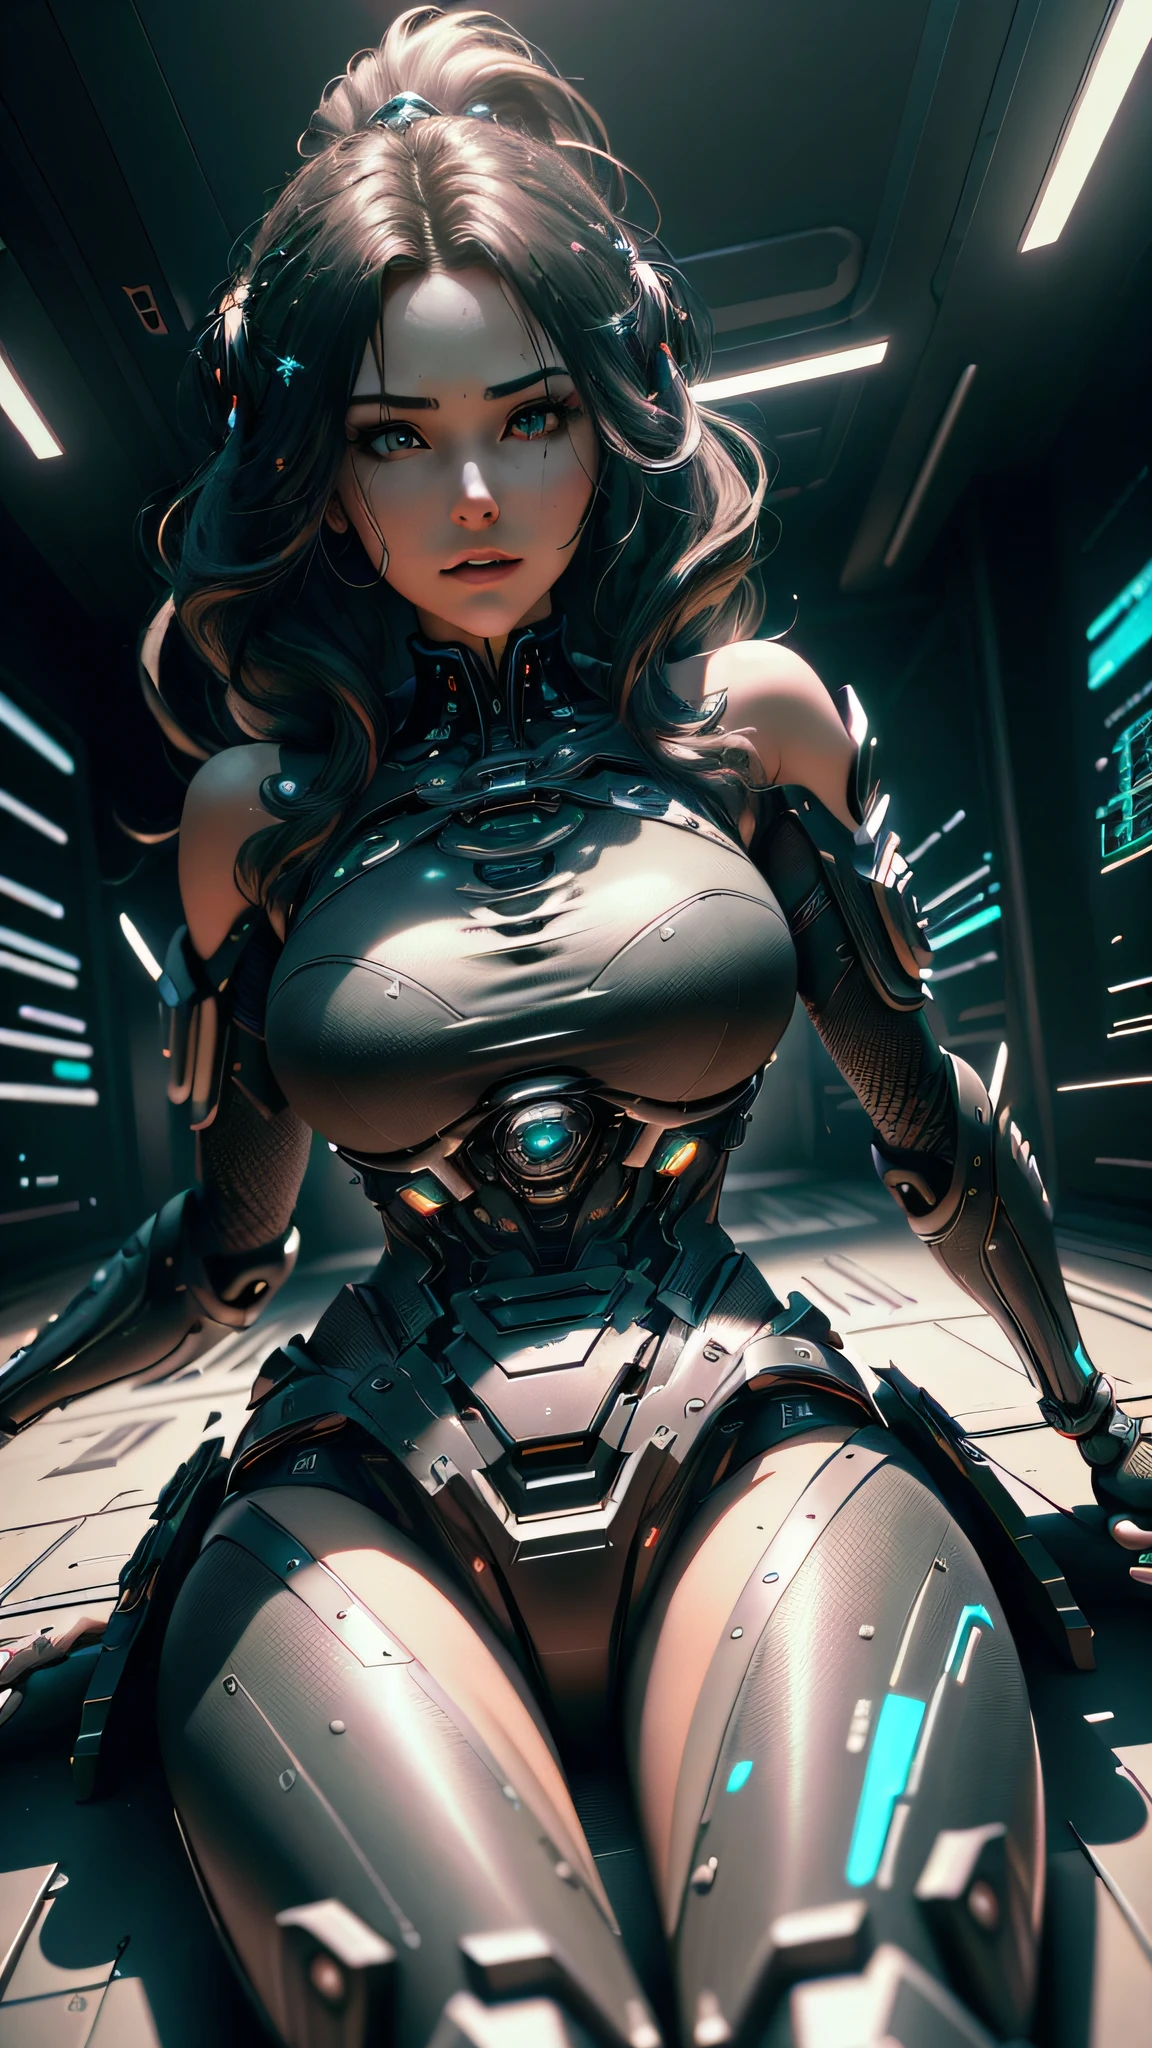 ((Best quality)), ((masterpiece)), (detailed:1.4), 3D, a beautiful cyberpunk female figure with thick hair, light particles, pure energy chaos anti-technology, HDR (High Dynamic Range), ray tracing, NVIDIA RTX, Super-Resolution, Unreal 5, Subsurface scattering, PBR TexturingPost-processing, Anisotropic Filtering, Depth-of-field, Maximum clarity and sharpness, Multi-layered textures, Albedo and Specular maps, Surface shading, Accurate Simulation of Light-Material Interactions, Perfect Proportions, Octane Render, two-tone lighting, large aperture, low ISO, white balance, rule of thirds, 8K RAW, sitting, from below